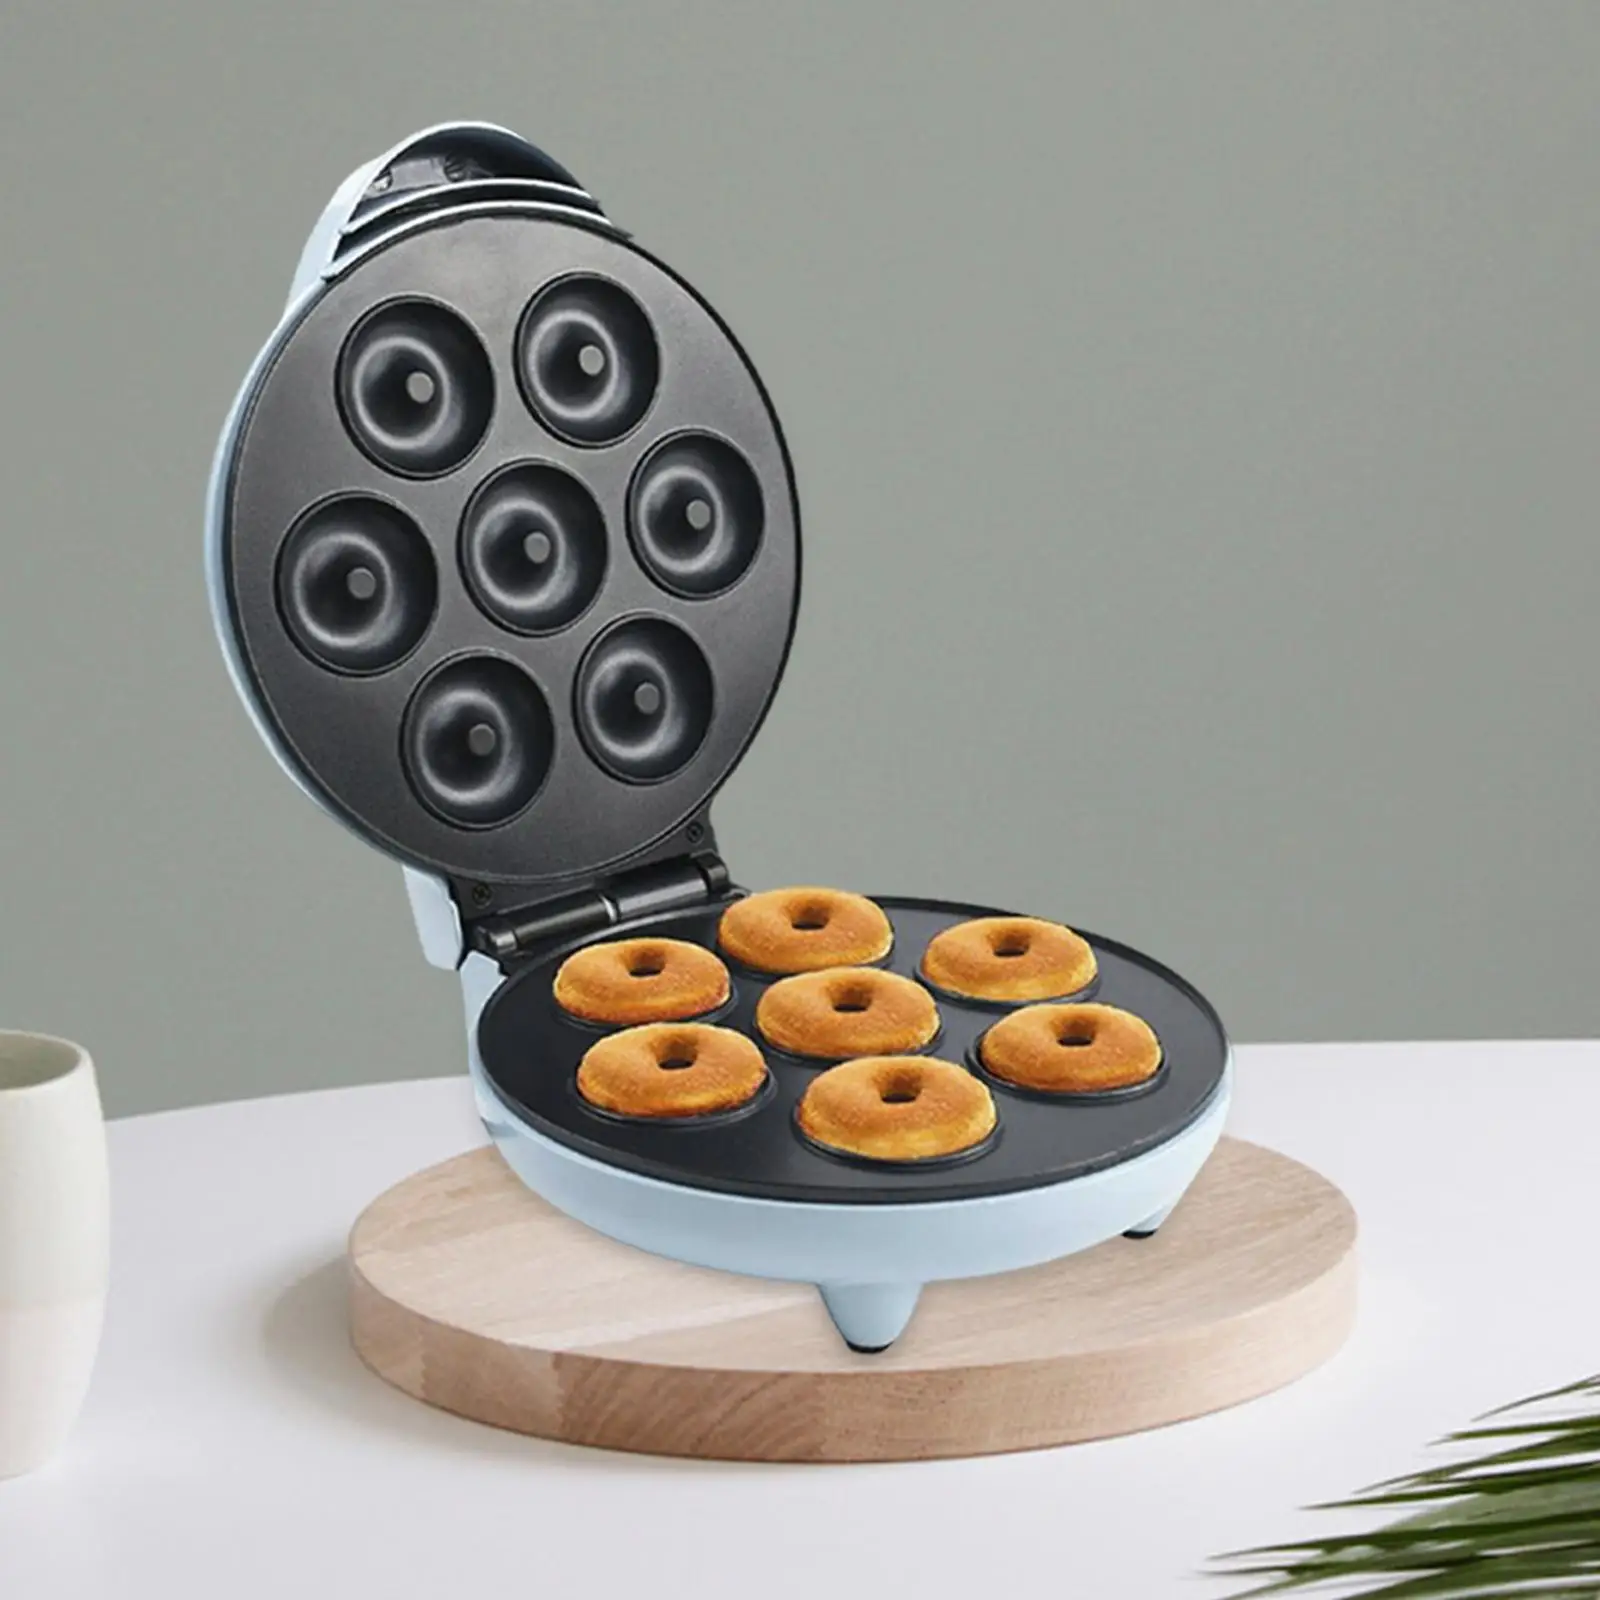 Mini Donut Maker Nonstick Baking Tool Automatic Heating Egg Cake Bread Baking Machine for Bakery Commercial Use Home DIY Cooking